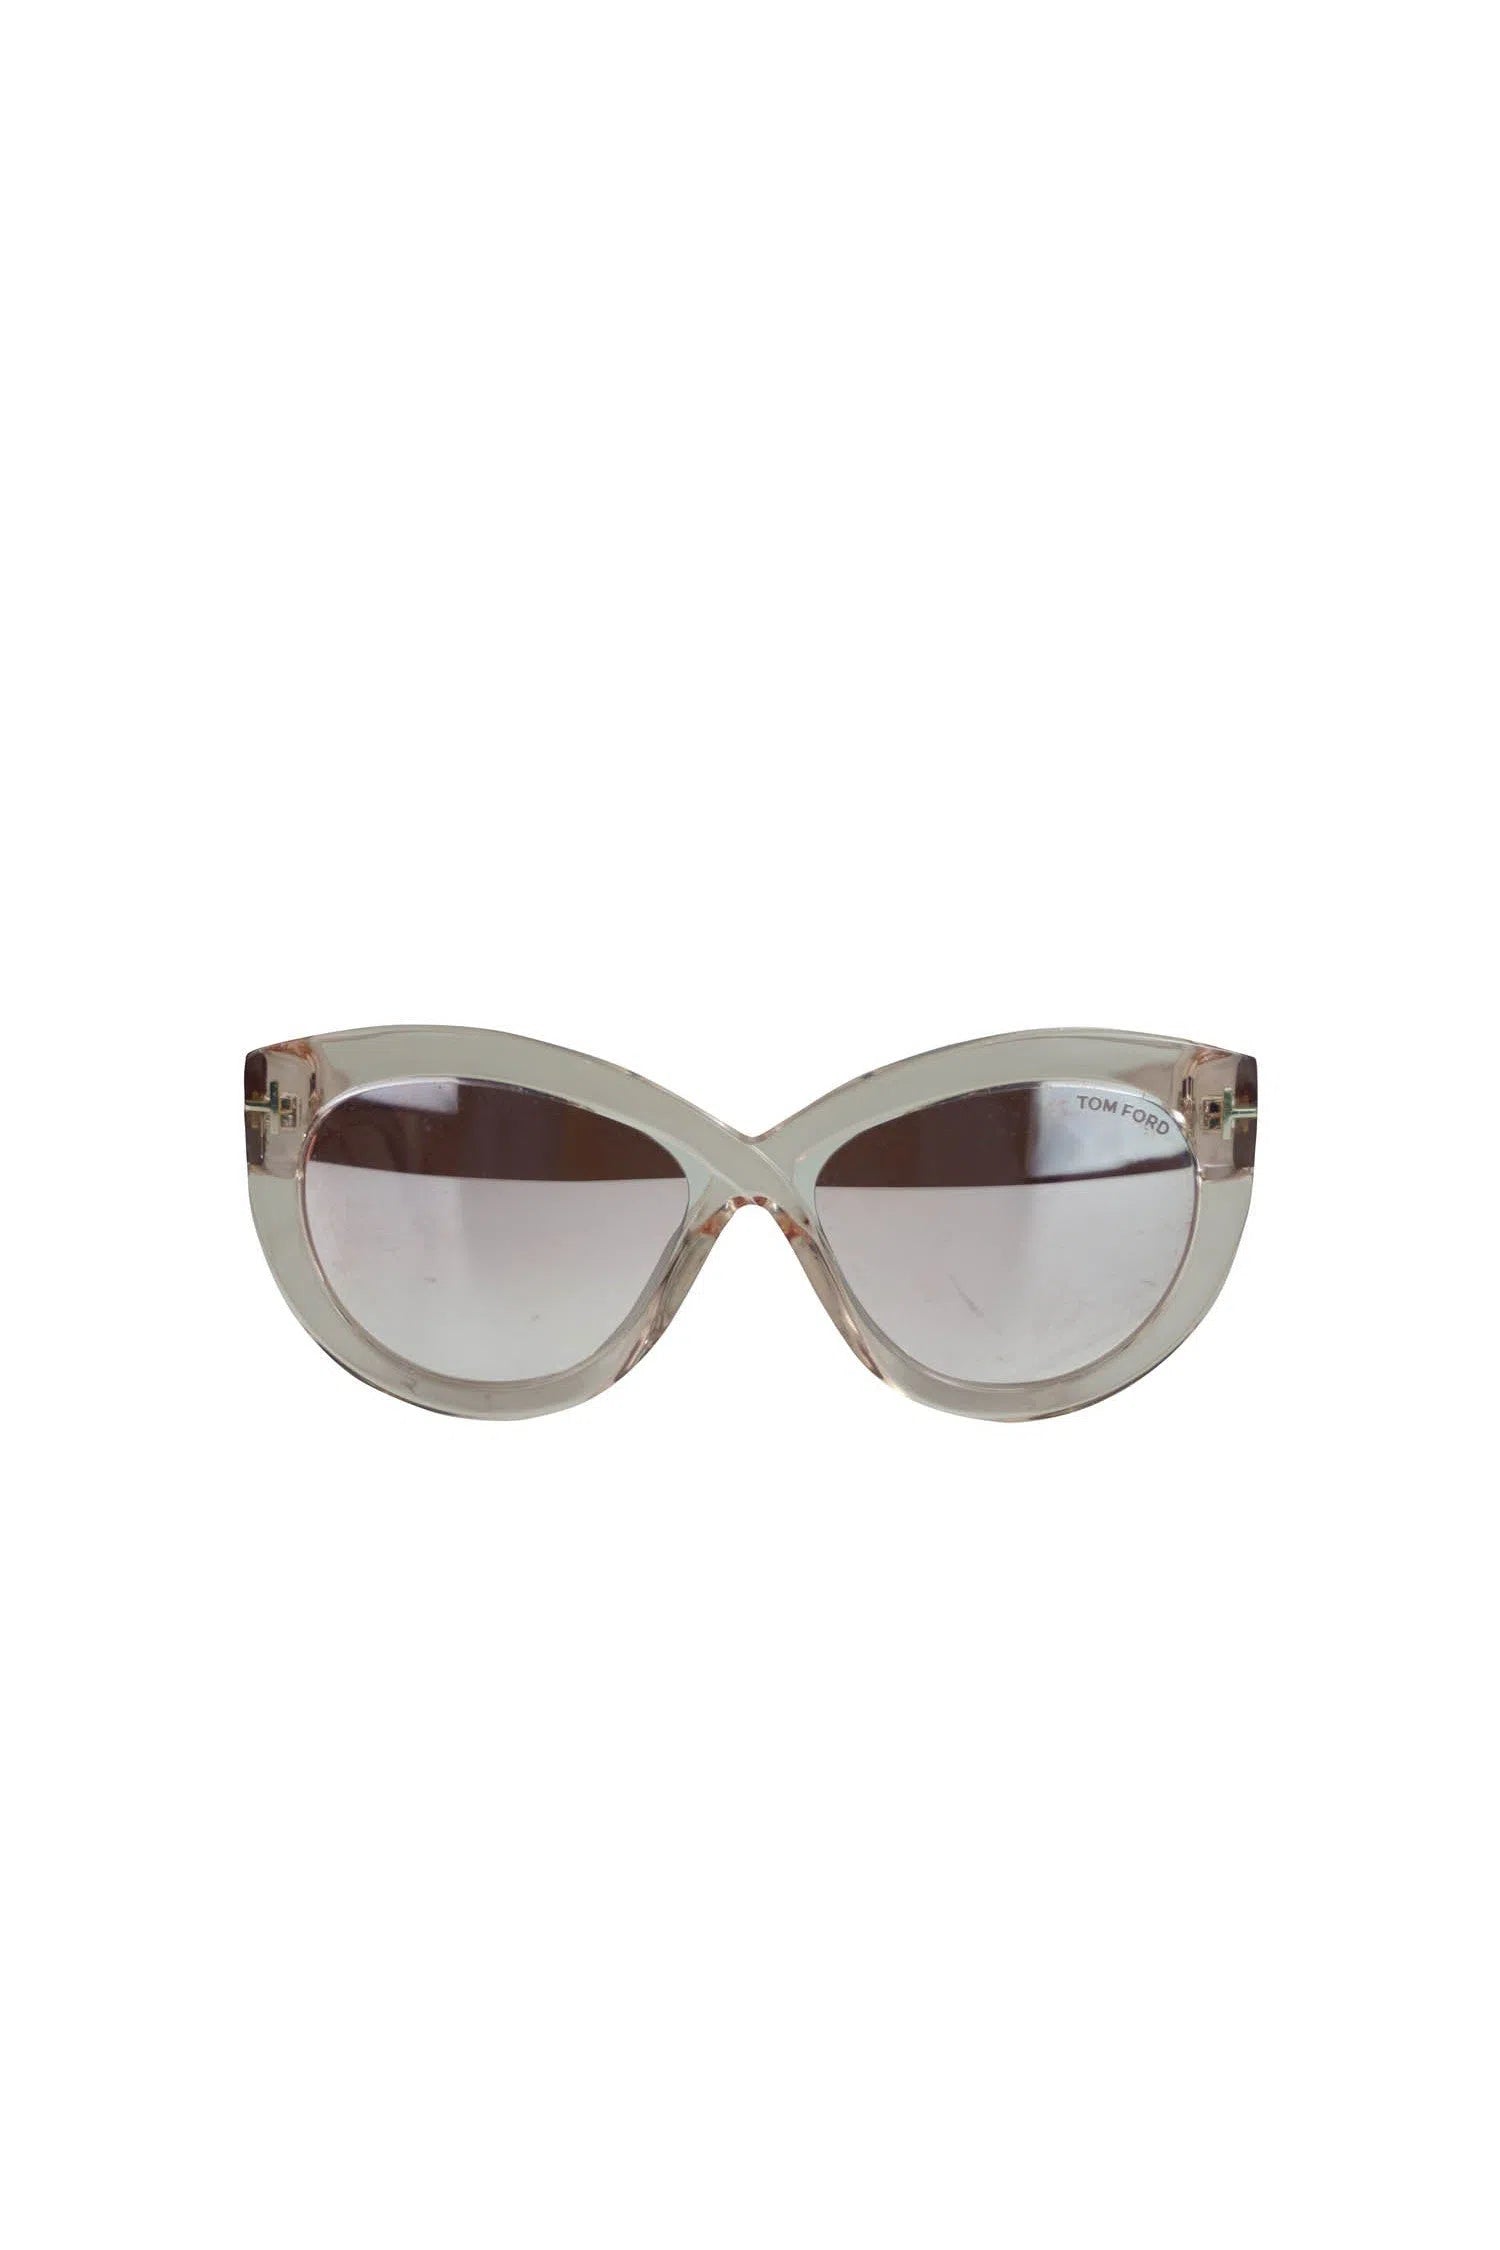 Tom Ford Pink Mirrored Cat Eye Sunglasses - Foxy Couture Carmel